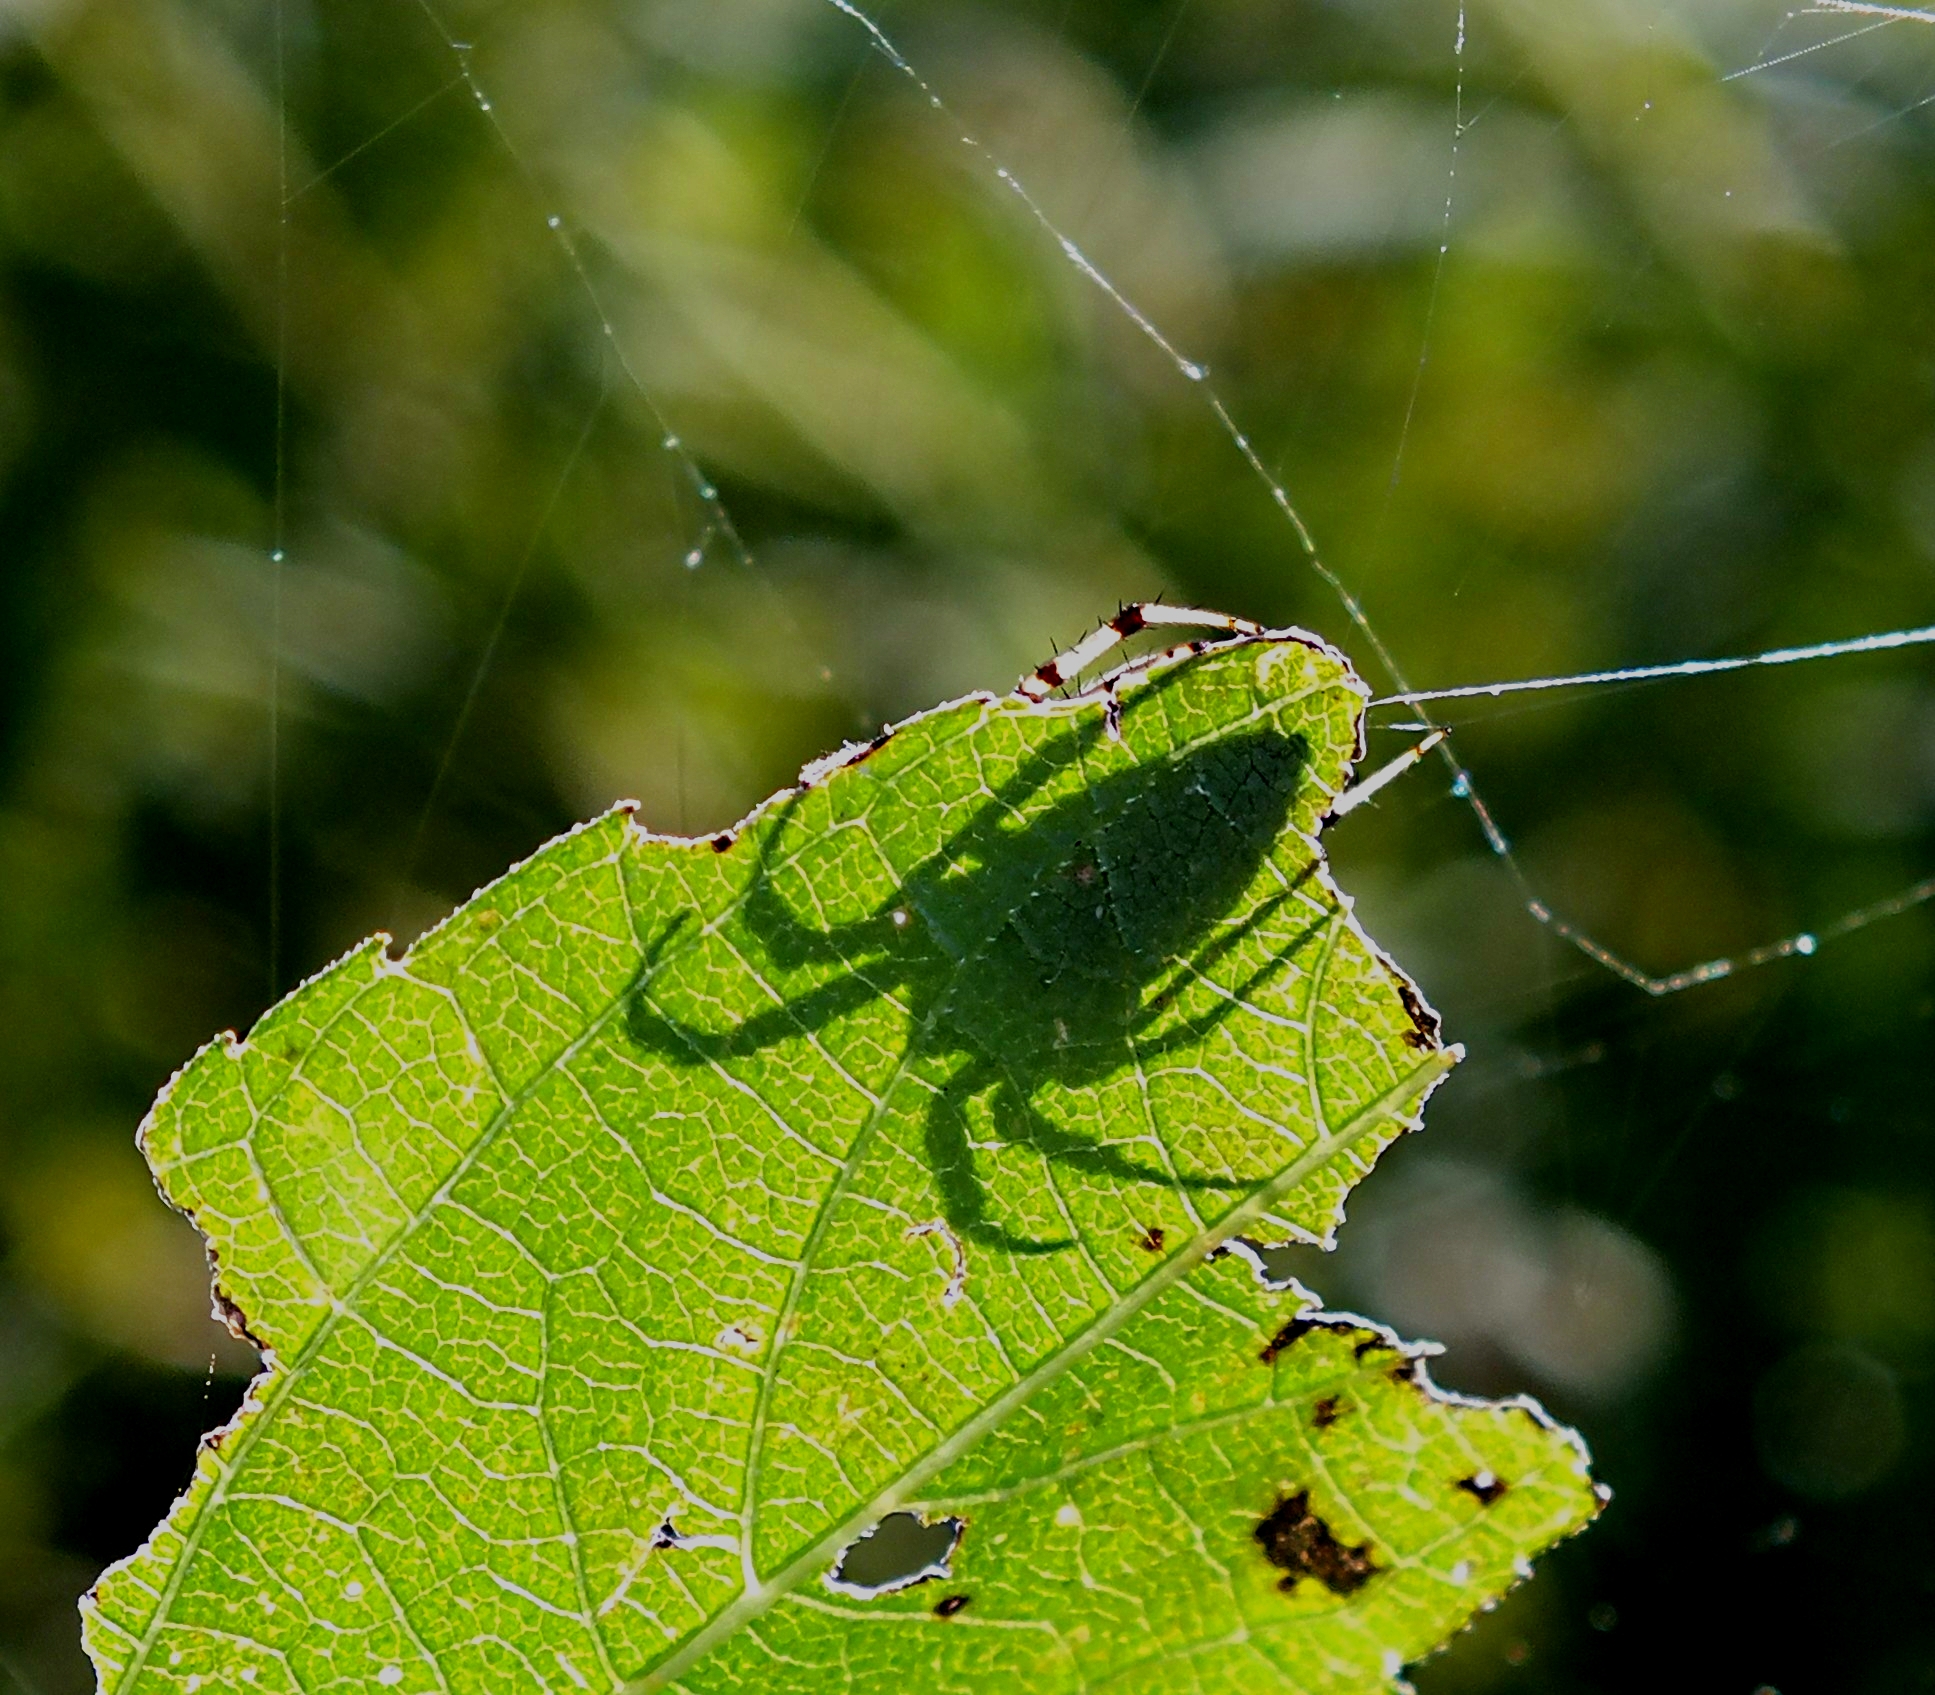 Spider Silhouette.  Photo by Thomas Peace 2014